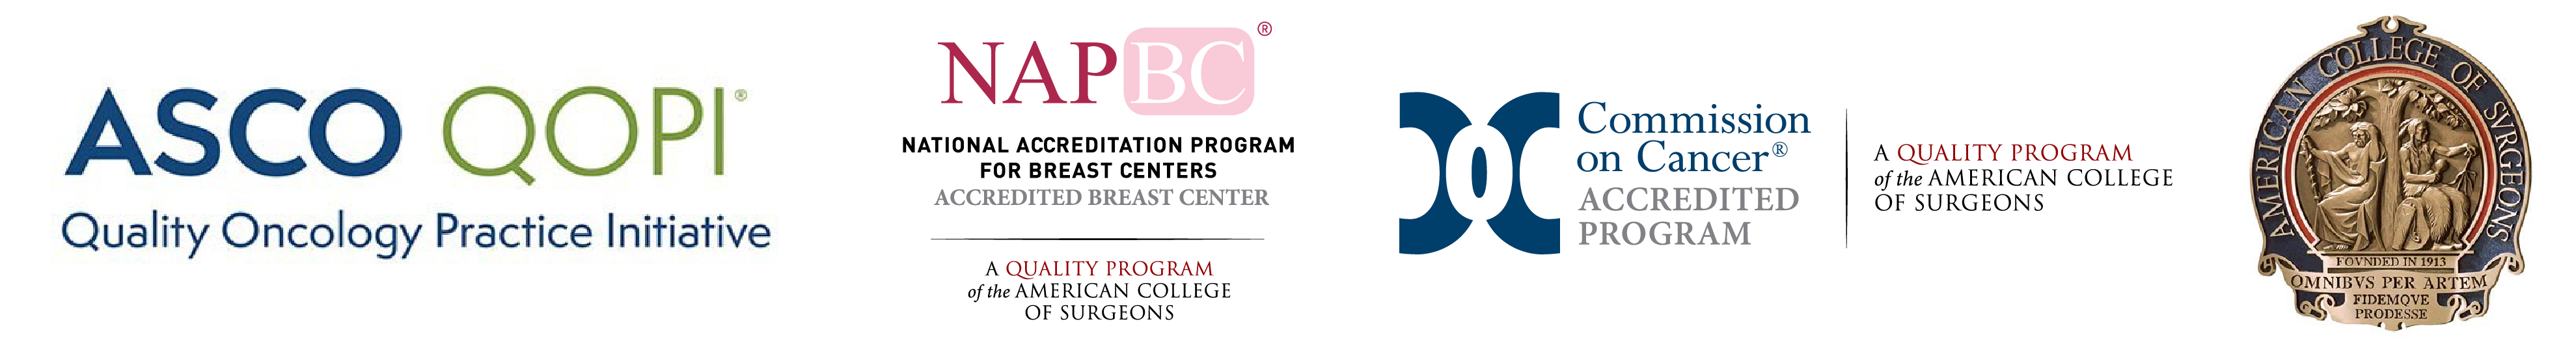 ASCO Quality Oncology Practice Initiative, National Accreditation Program for Breast Centers, Commission on Cancer, and American College of Surgeons accreditation logos